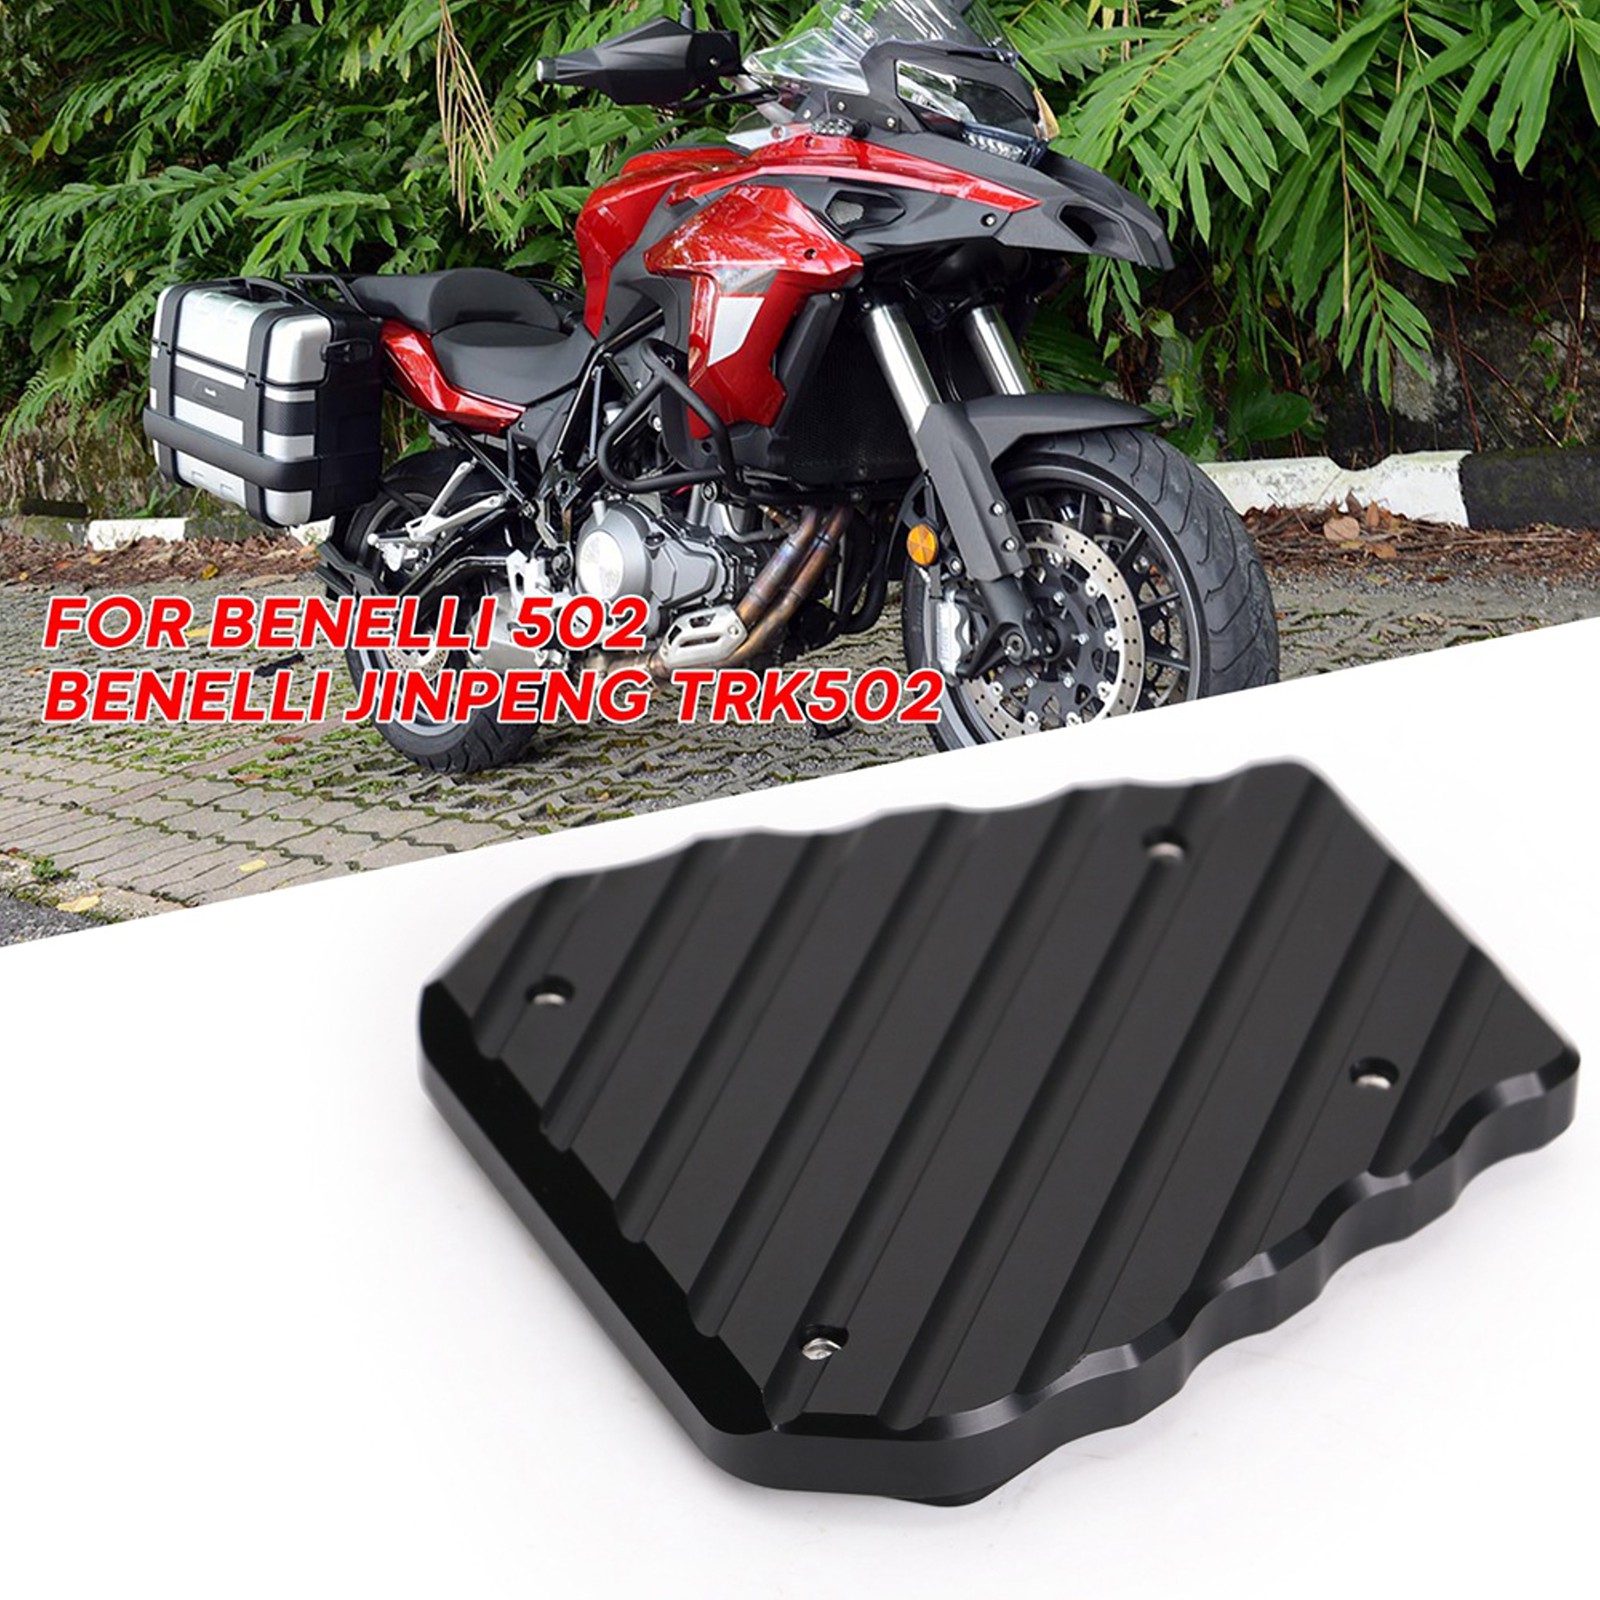 IN STOCK Motorcycle CNC Aluminum Side Stand Extension Plate Motorcycle Kickstand For Benelli TRK502